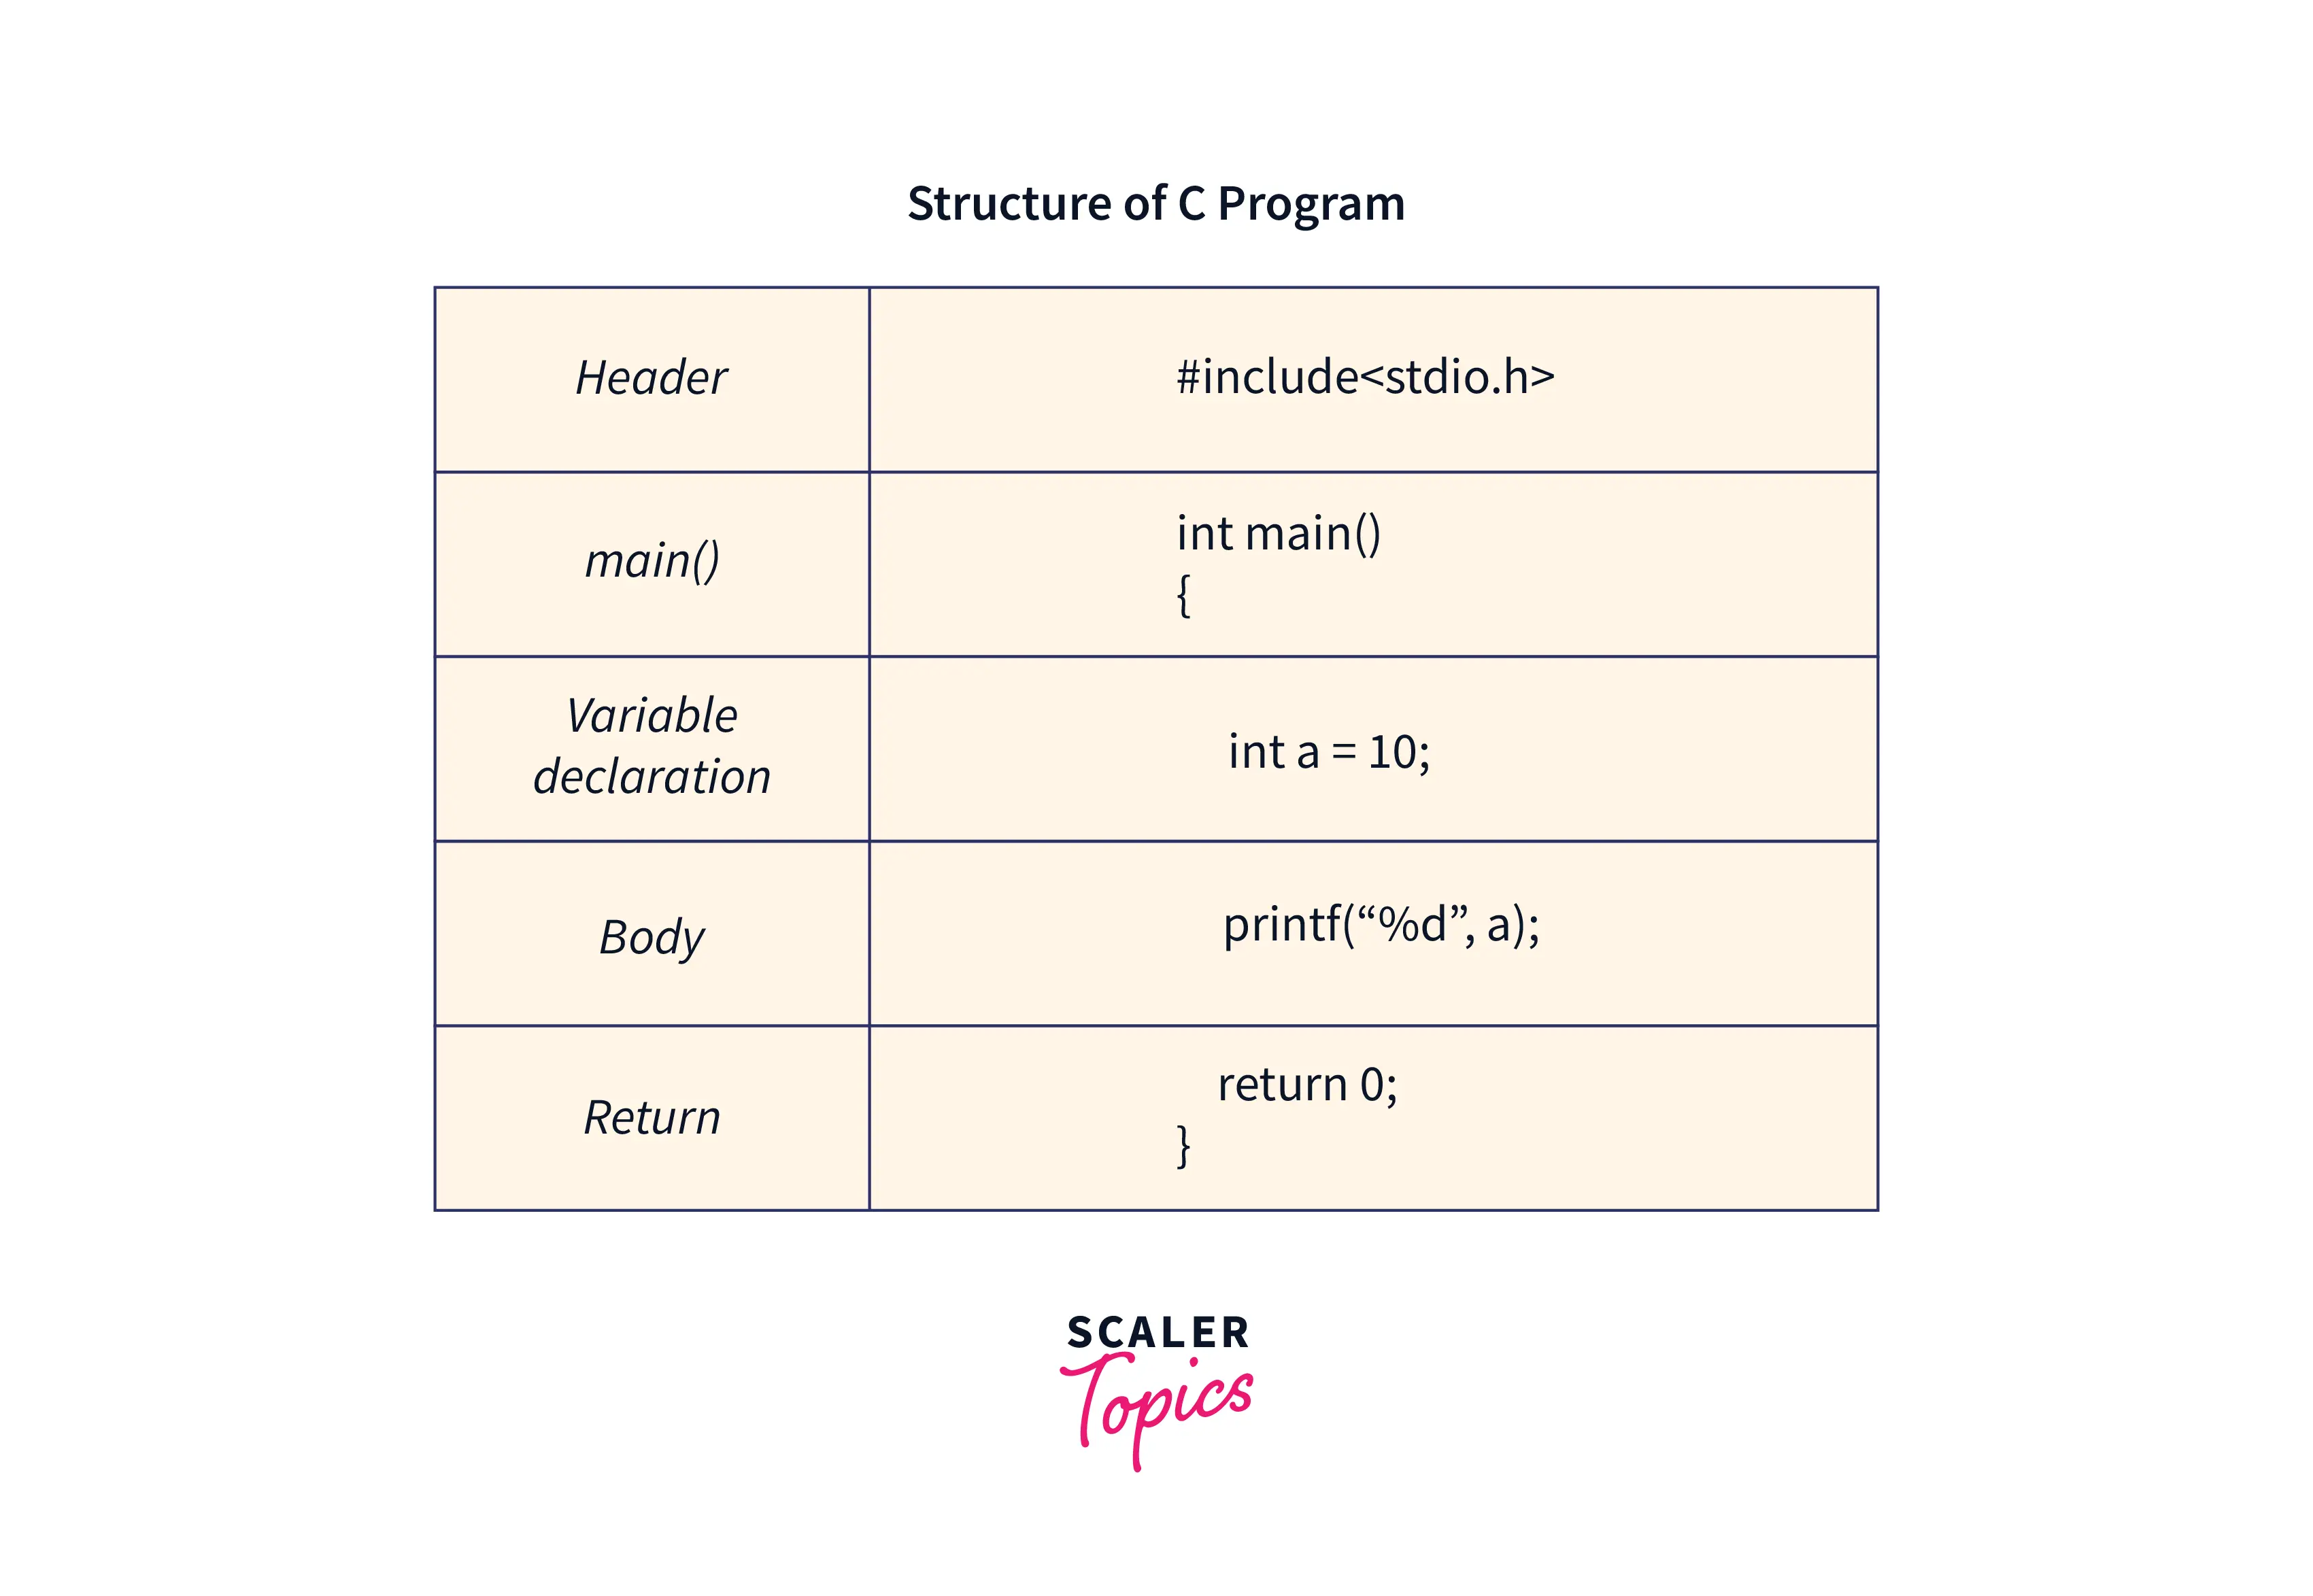 REQUIRED STRUCTURE OF C PROGRAM